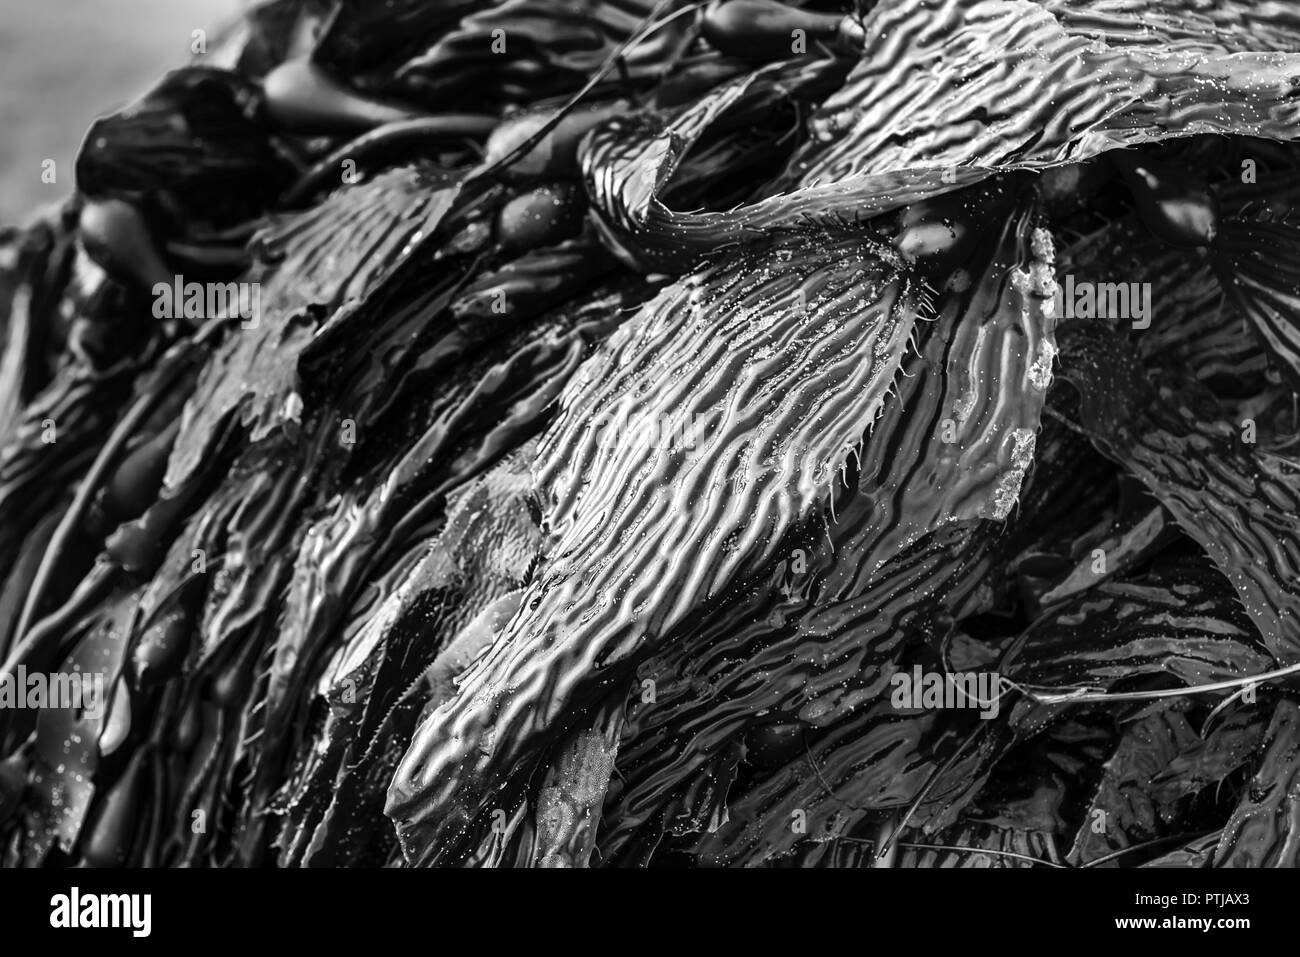 Kelp lying on a Southern California beach in black and white. Stock Photo